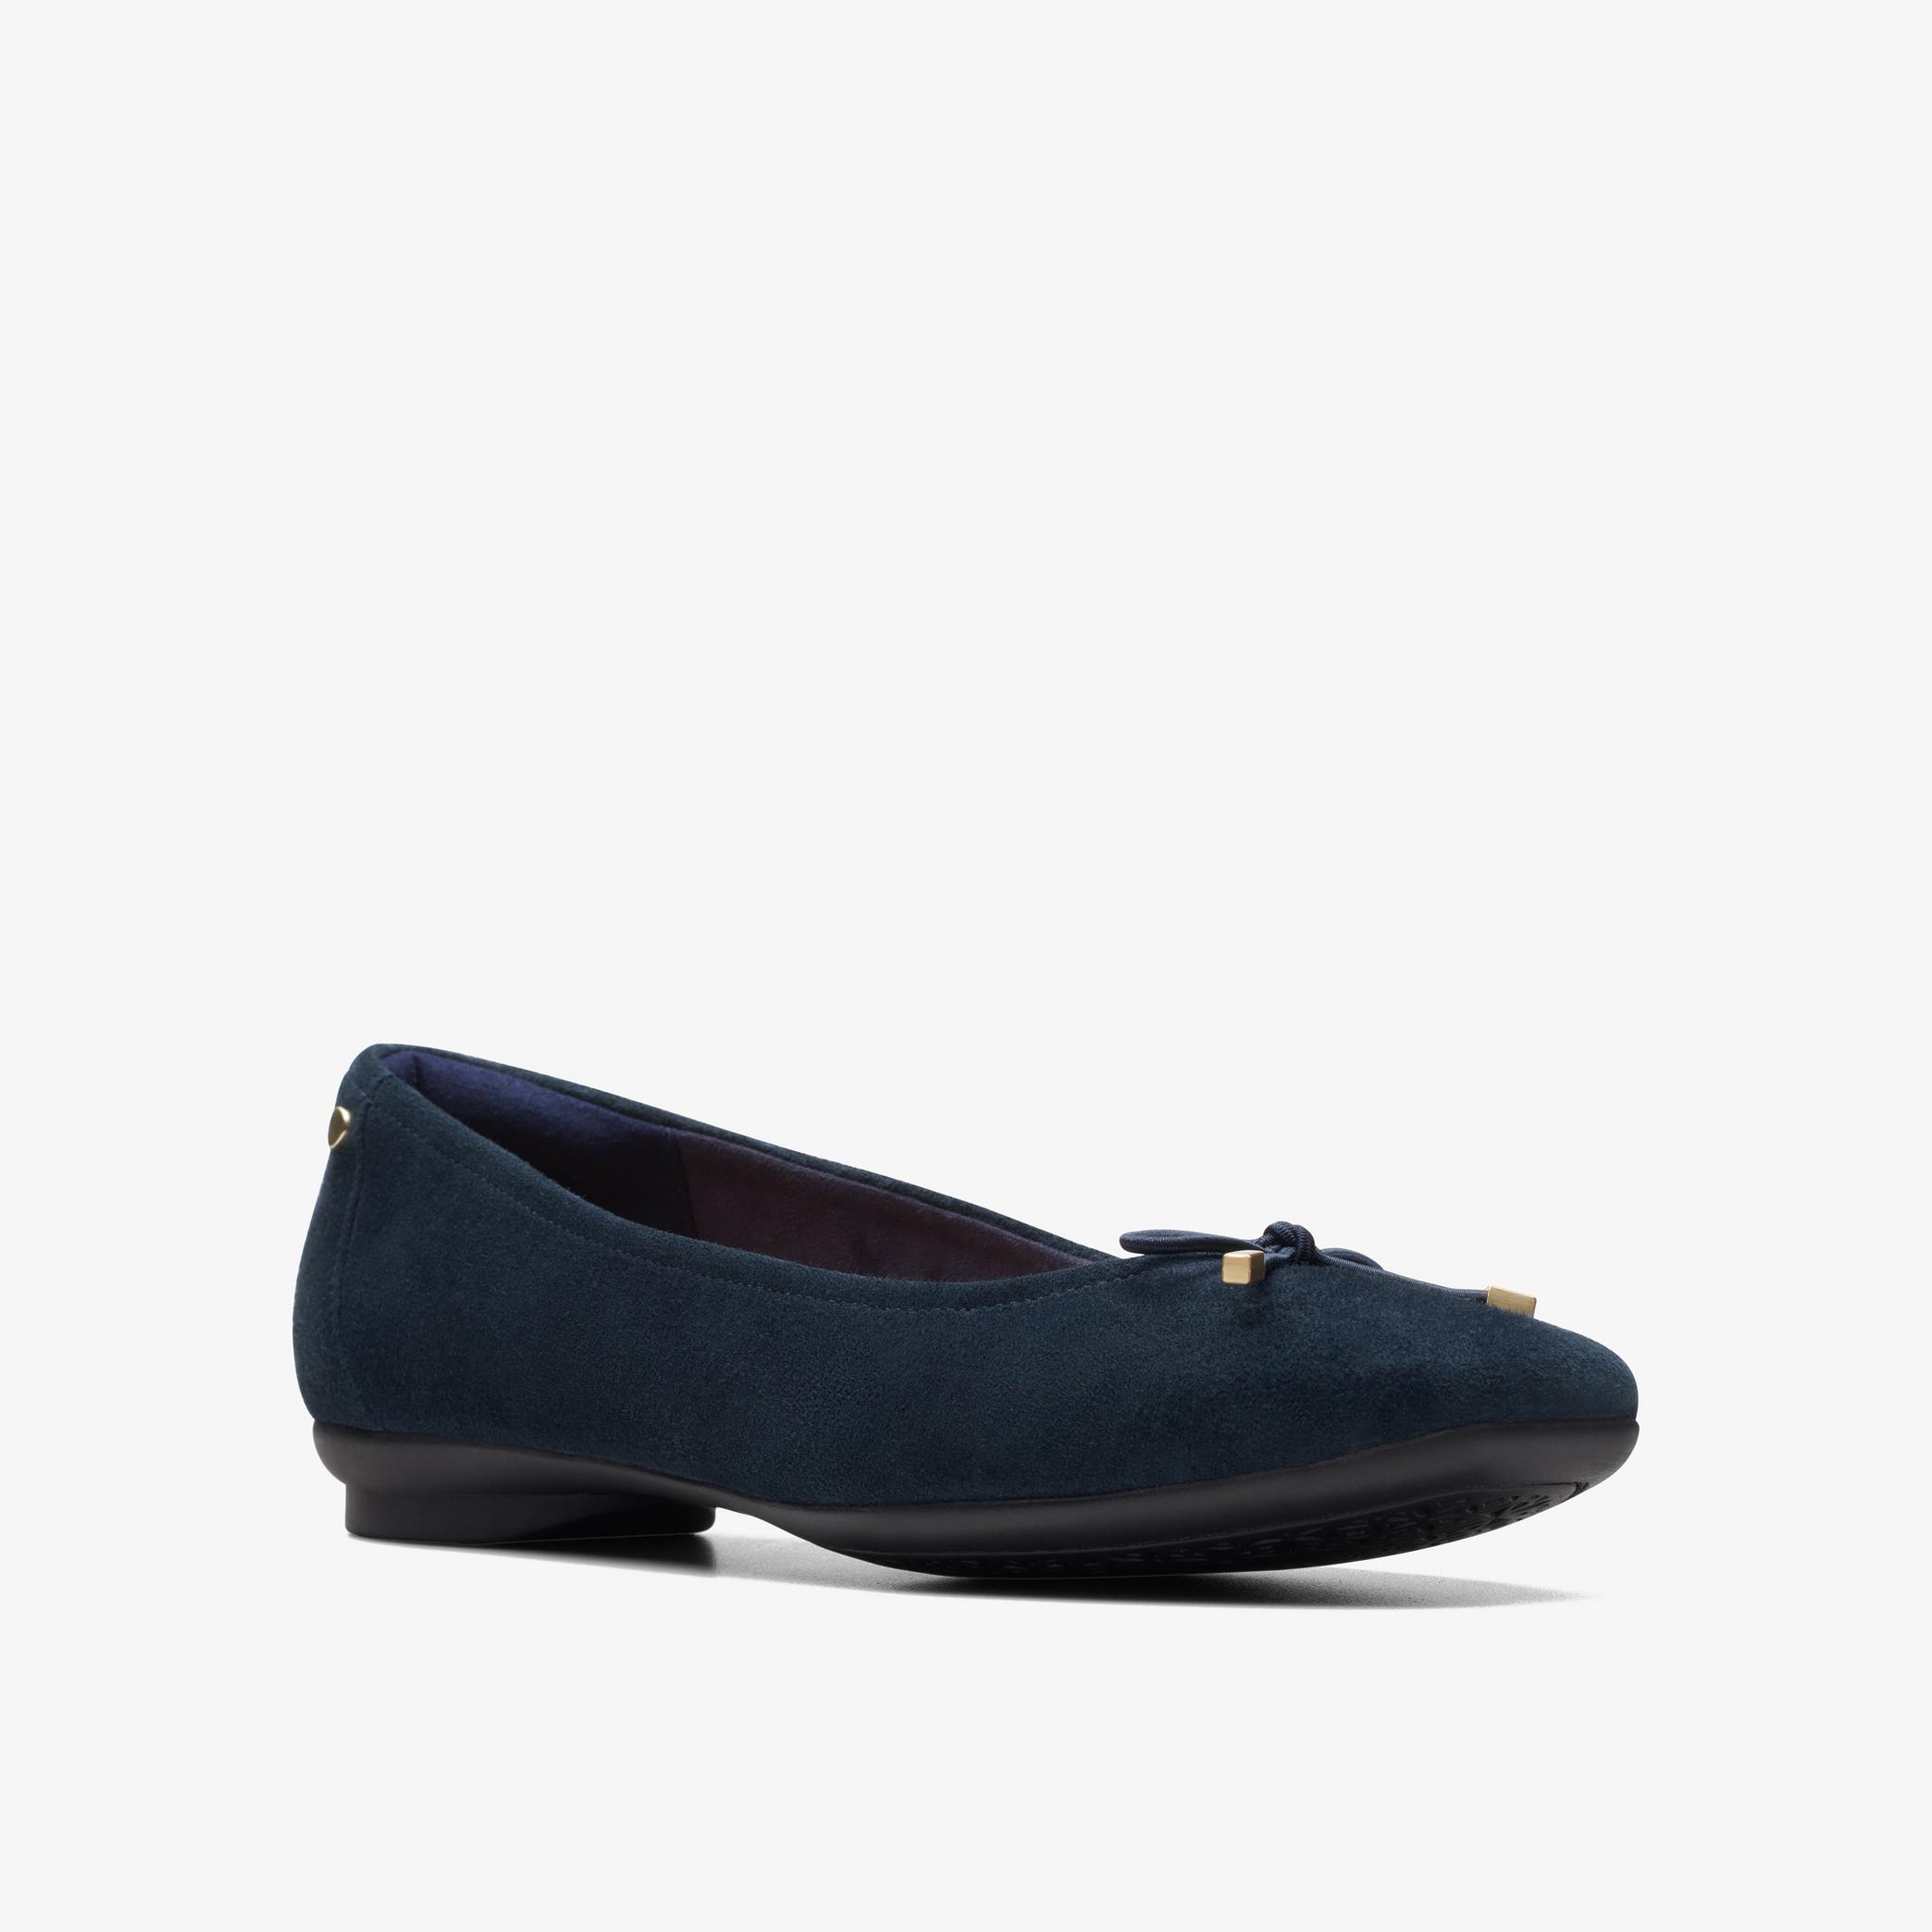 Candra Light Navy Suede Pumps, view 3 of 6